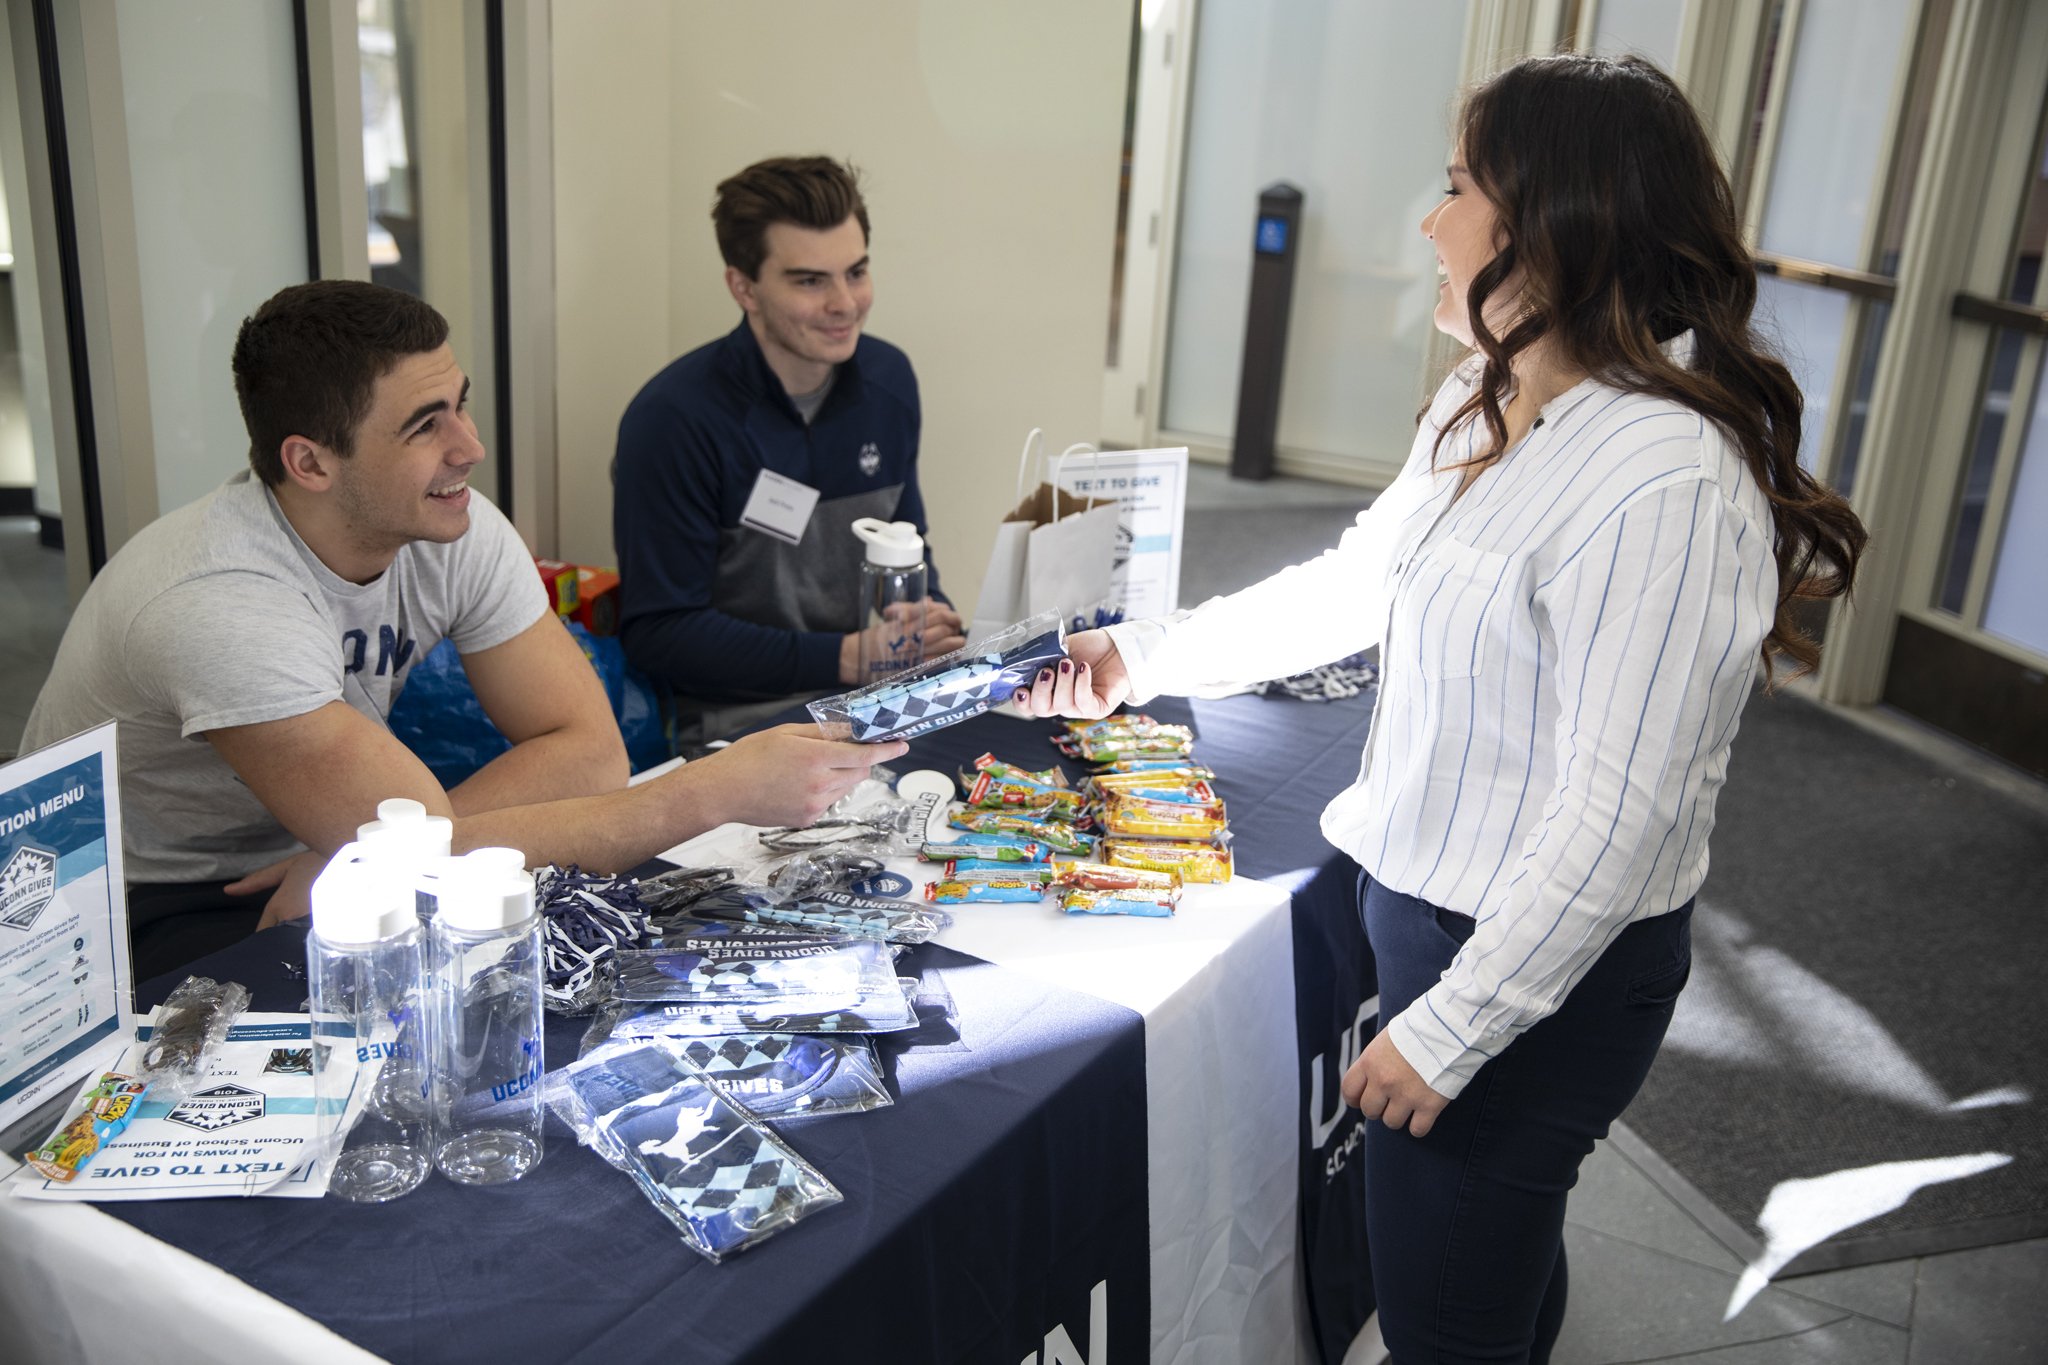 Students at giving table during UConn Gives